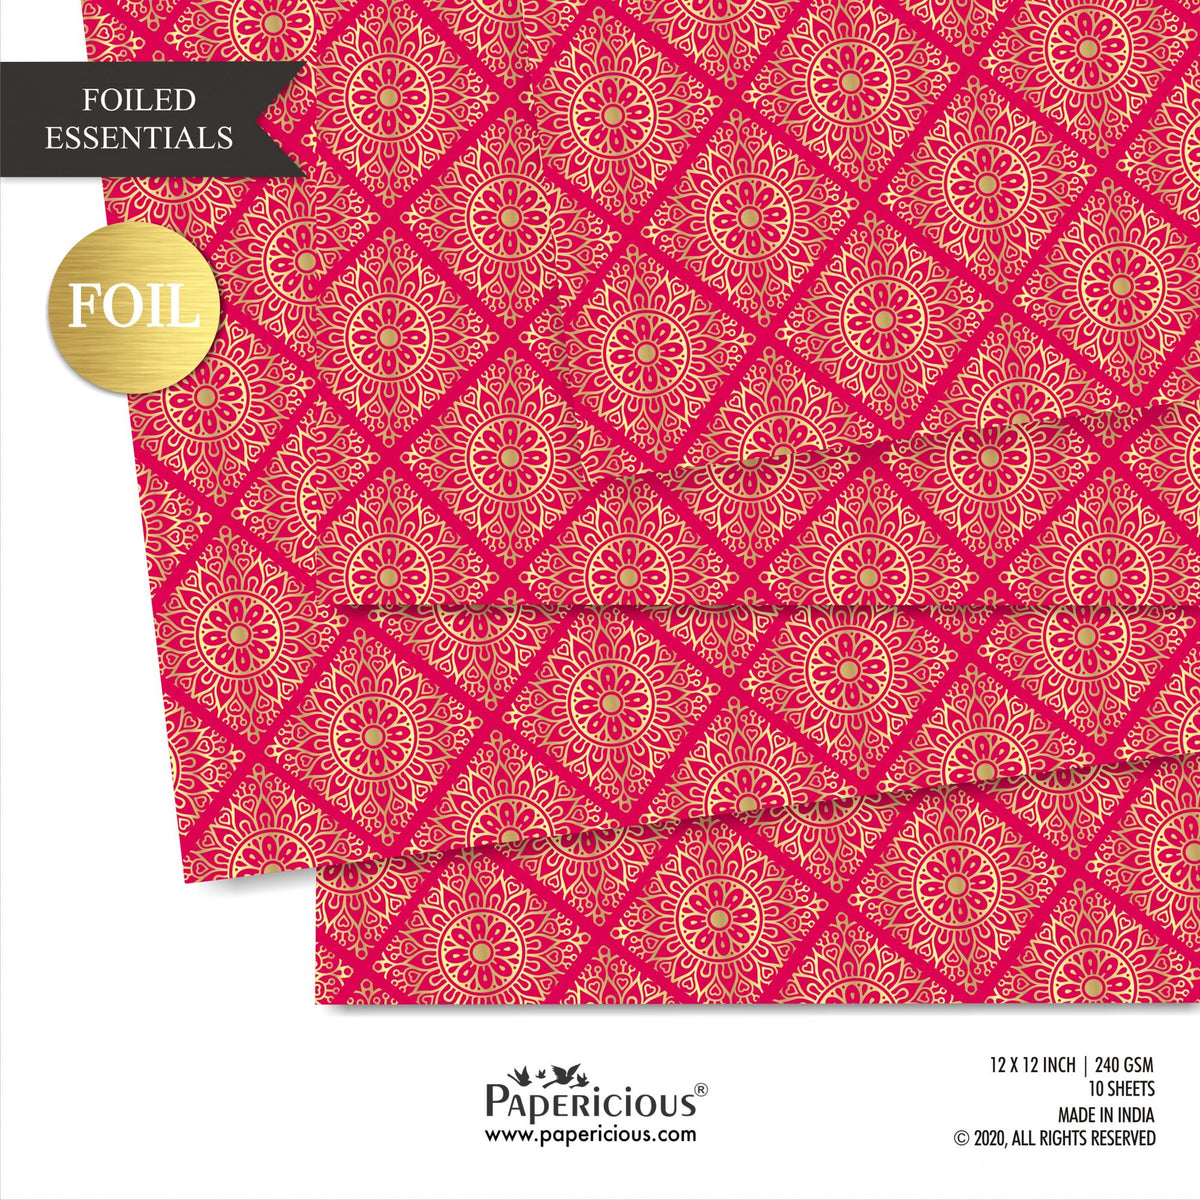 Papericious - Golden Foiled Pattern Scrapbook Papers 12x12 inch / 10 sheets / #12514